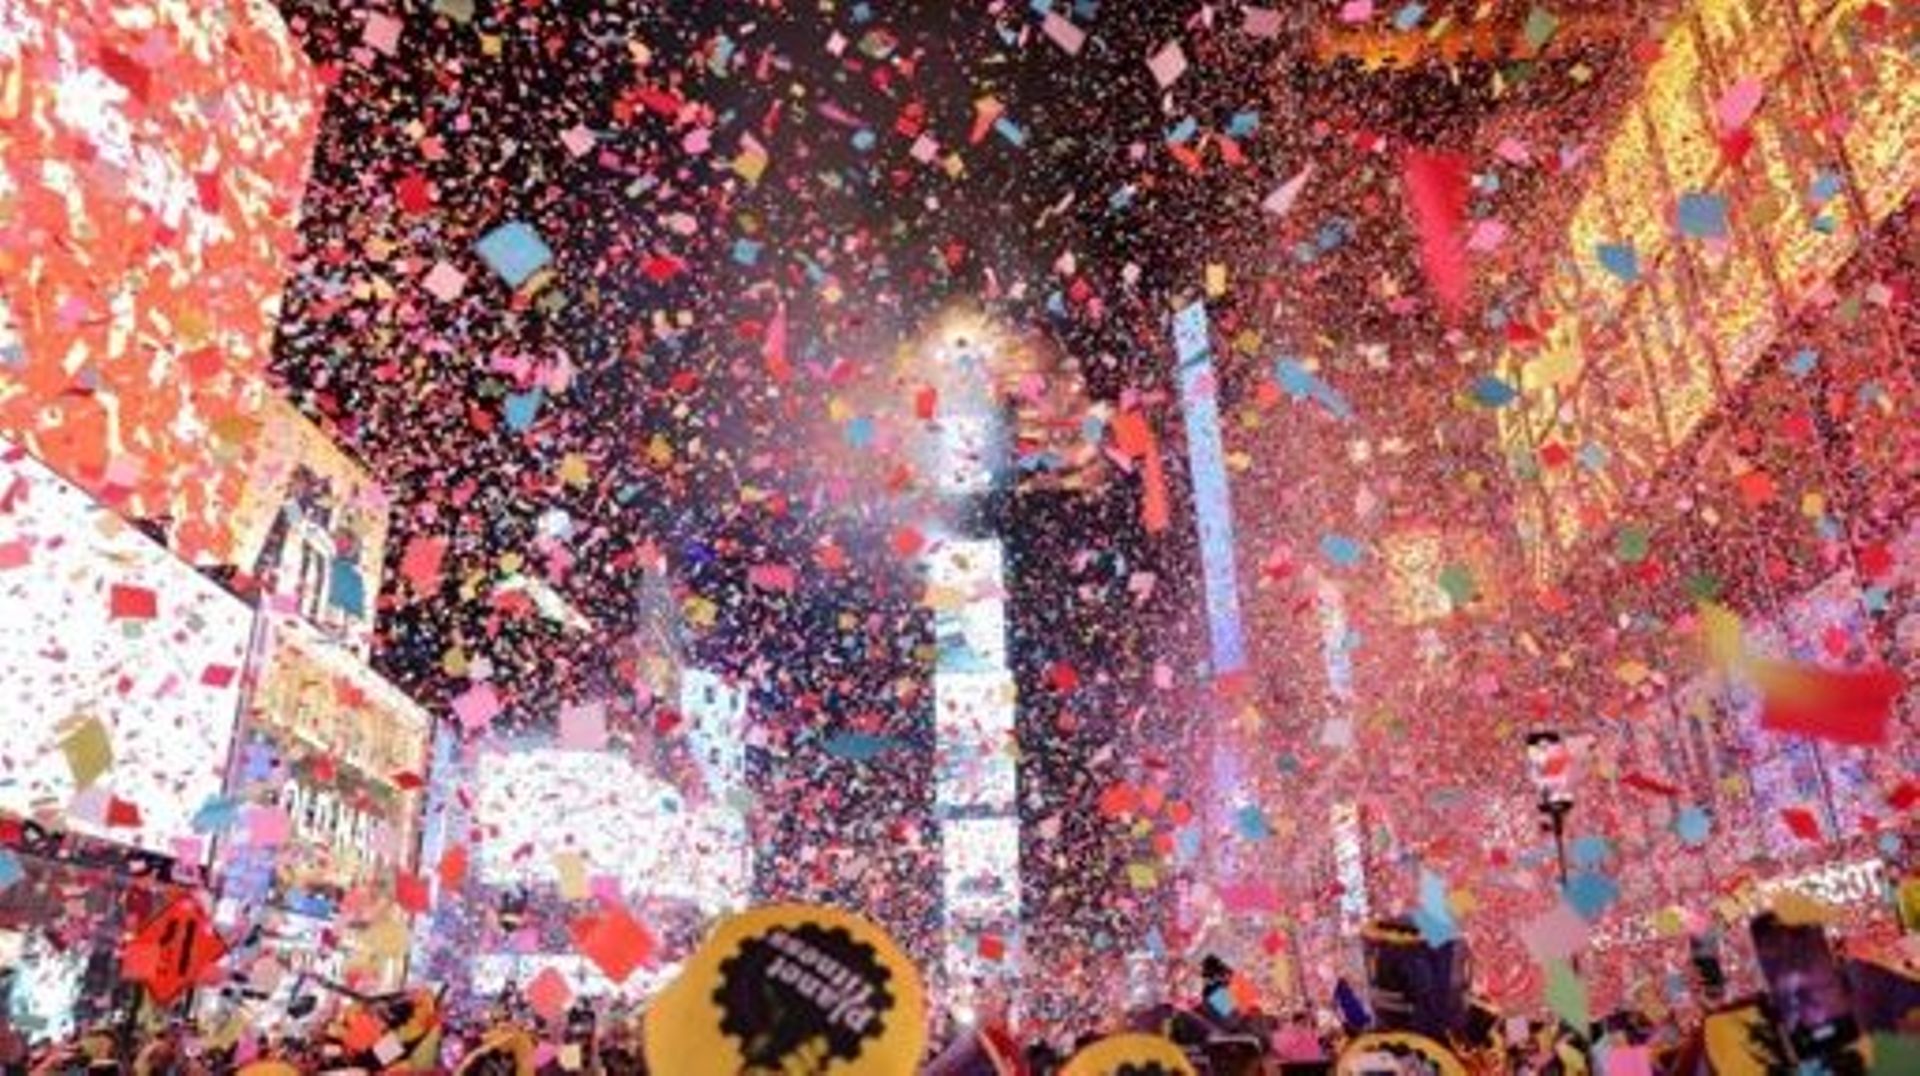 Onlookers watch as confetti fills the air to mark the beginning of the new year, in Times Square, New York City, on January 1, 2023.   Yuki IWAMURA / AFP